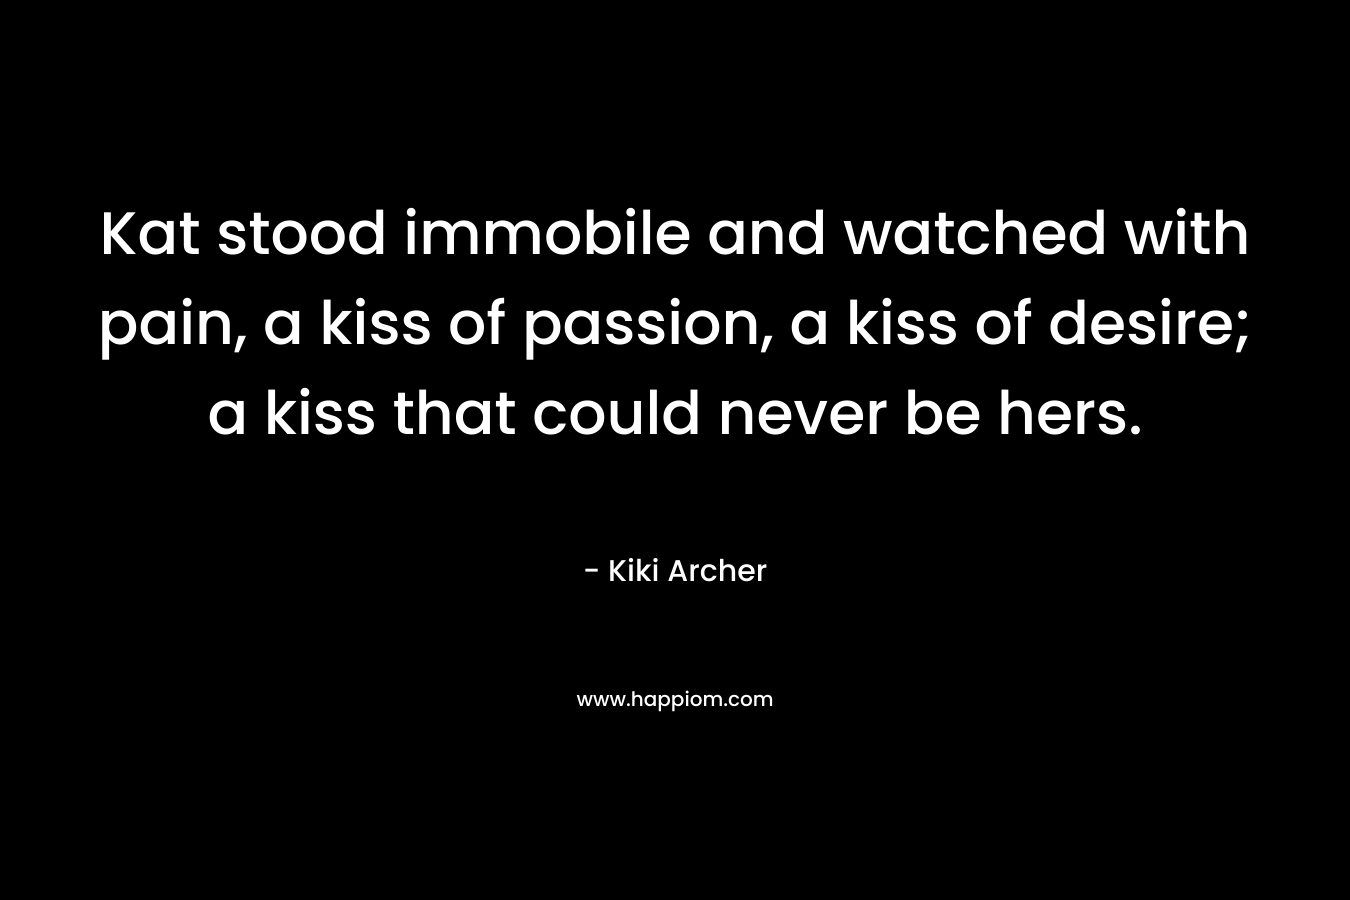 Kat stood immobile and watched with pain, a kiss of passion, a kiss of desire; a kiss that could never be hers.